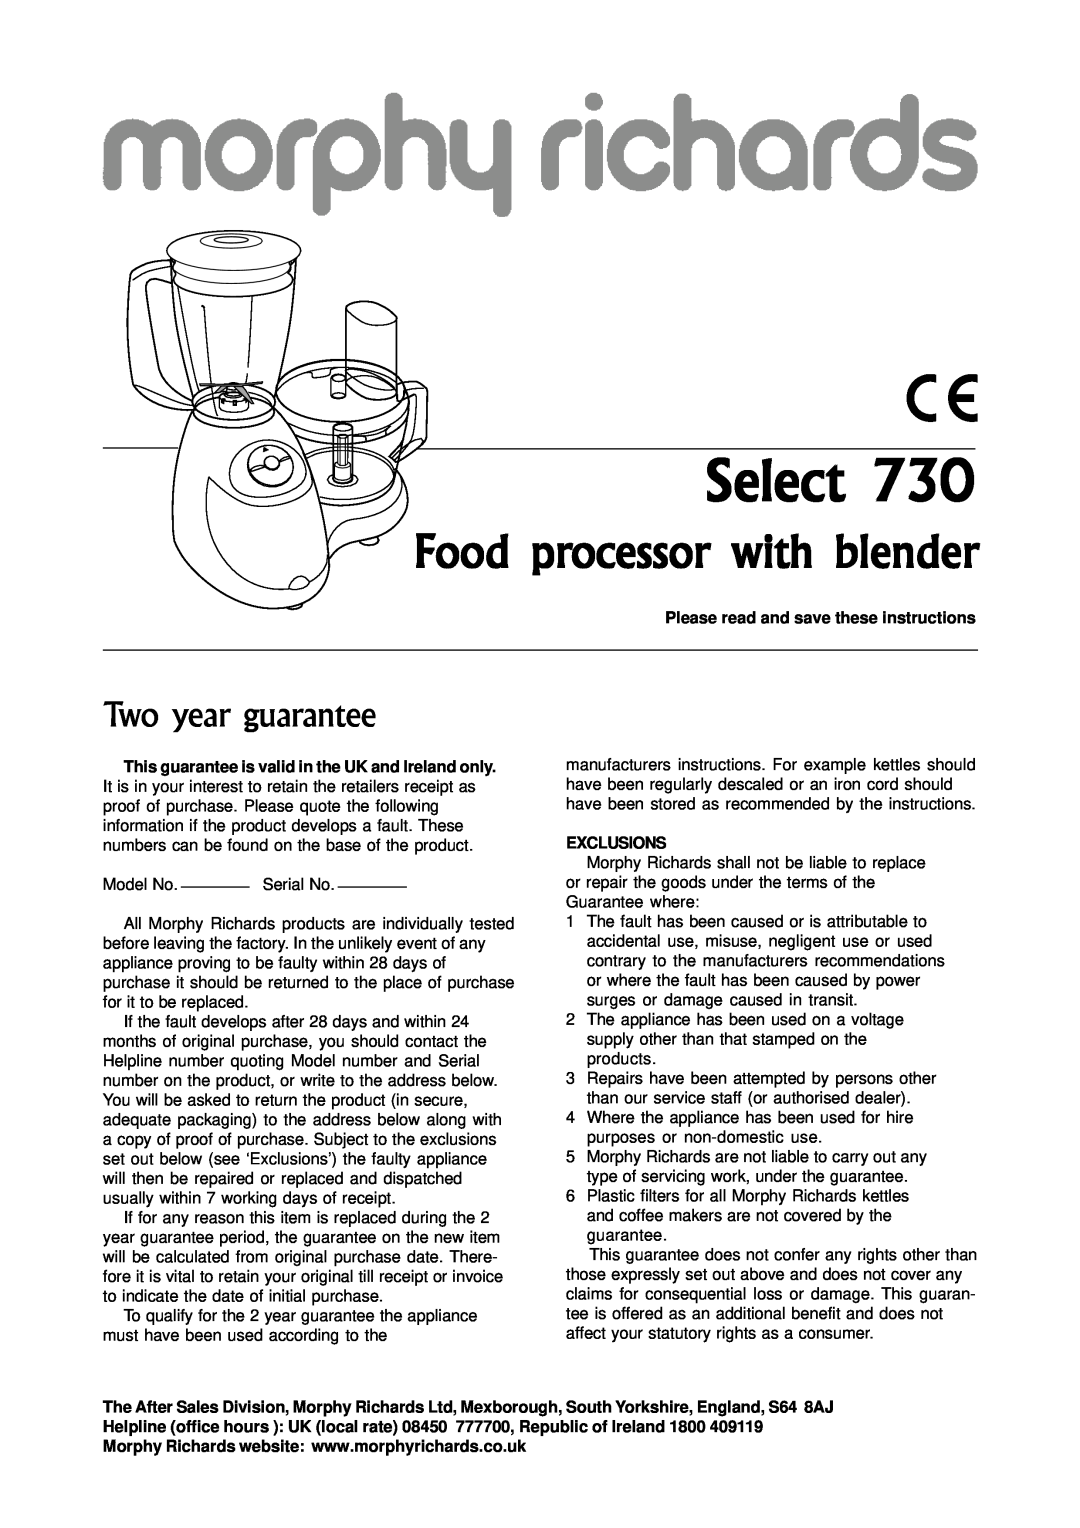 Morphy Richards 730 manual Select, Food processor with blender, Two year guarantee, Exclusions 